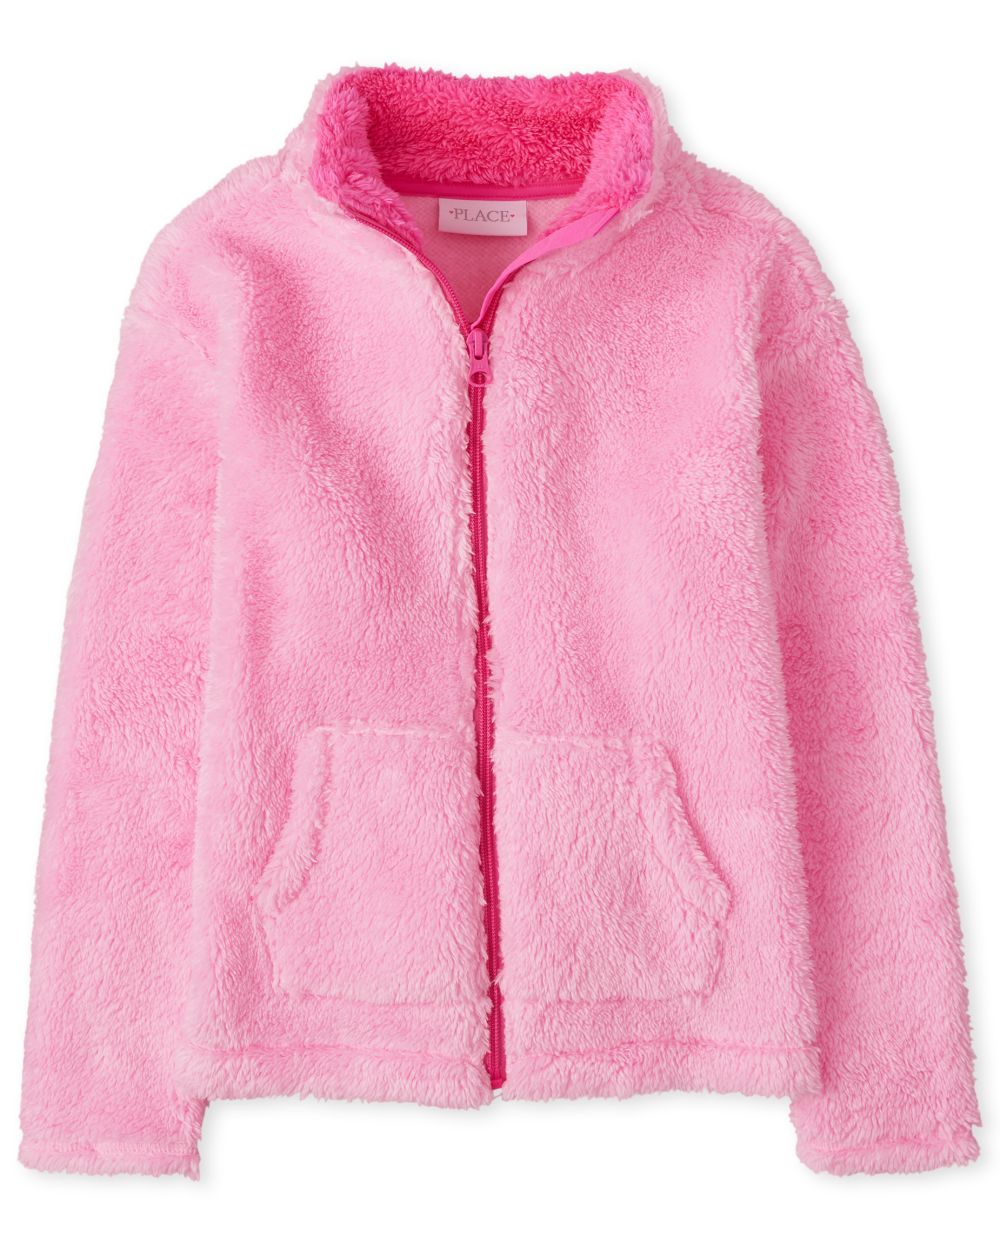 

Girls Sherpa Zip Up Mock Neck Jacket - Pink - The Children's Place